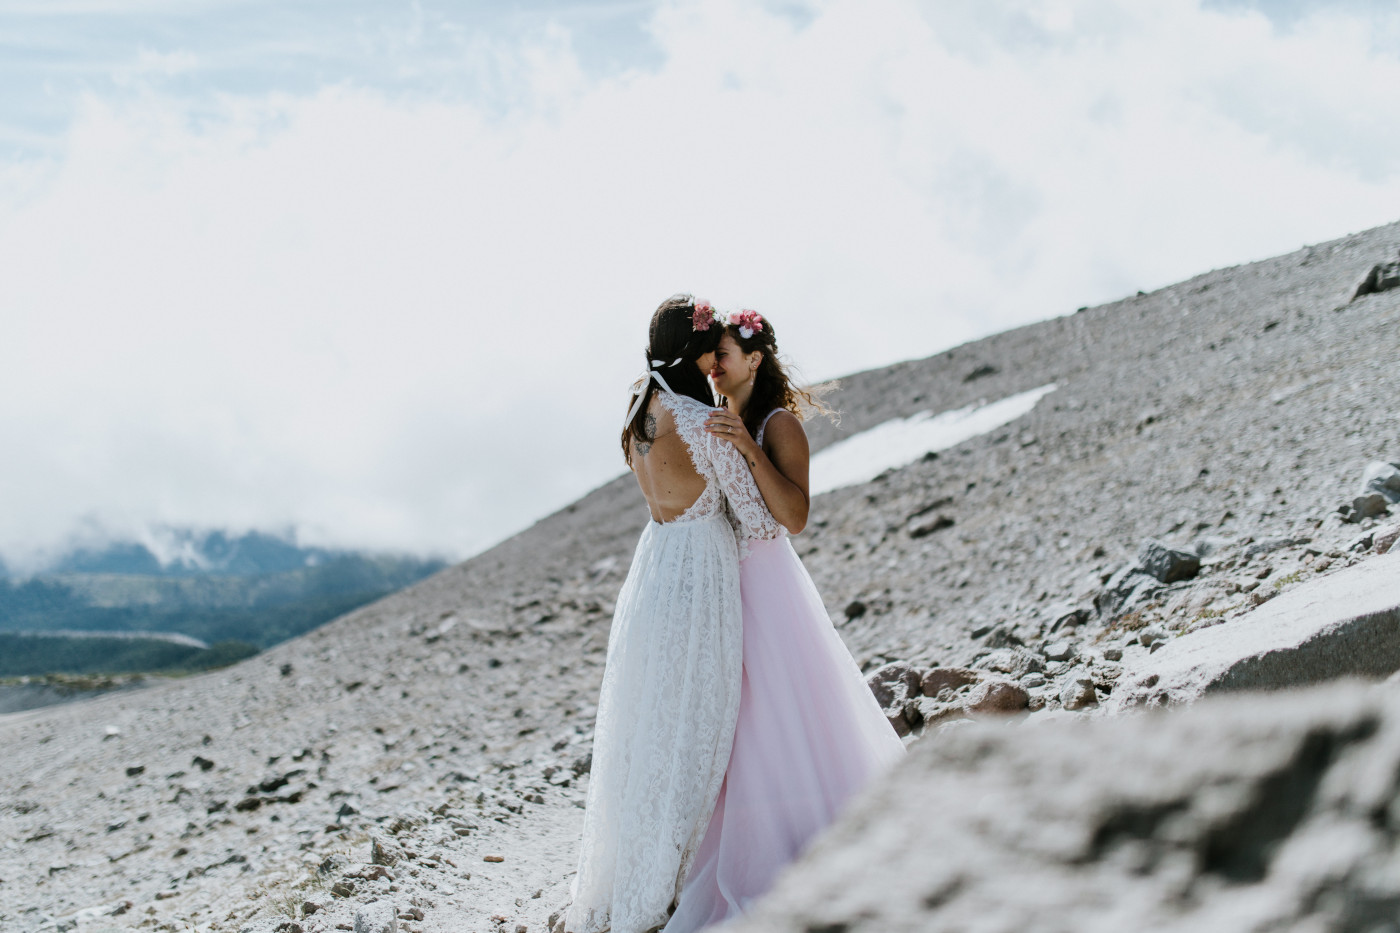 Margaux and Heather stand among the rocks of Mount Hood. Elopement photography at Mount Hood by Sienna Plus Josh.